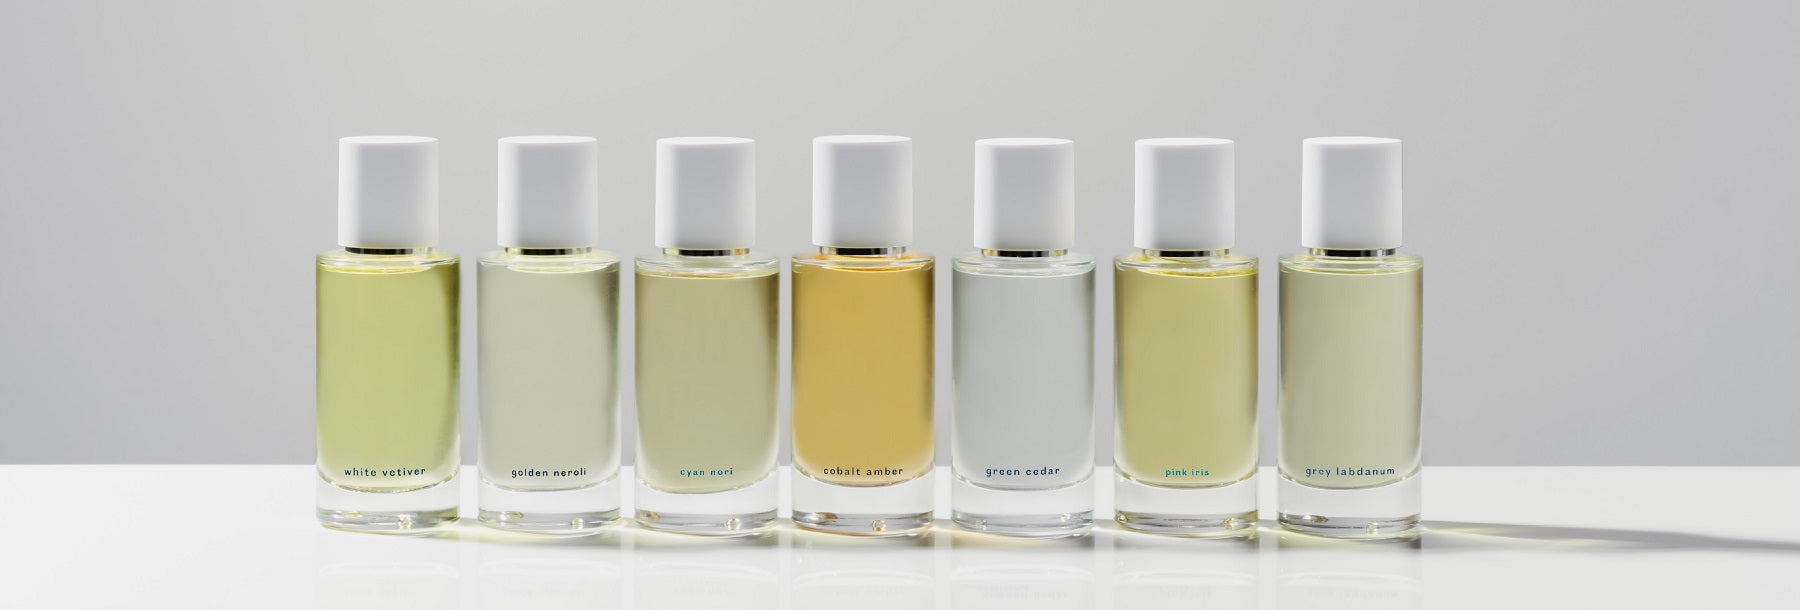 Abel Odor 100% Natural Perfume. Official Stockist. Natural & Organic Perfume Clean Beauty Store in Melbourne, Australia.